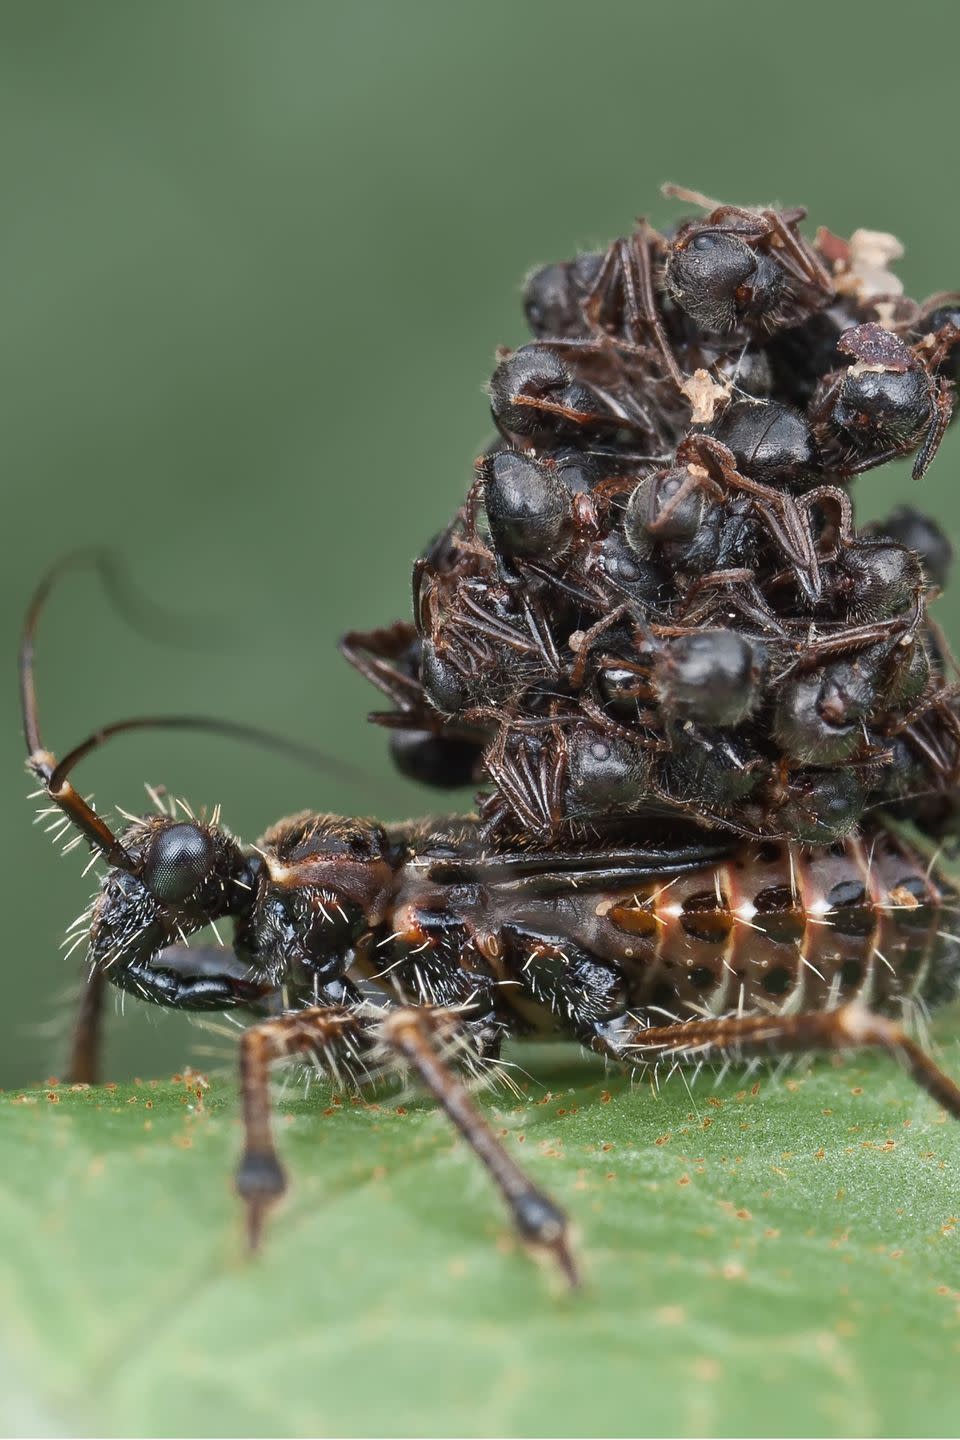 32) Assassin bugs are deadly (and fashionable)